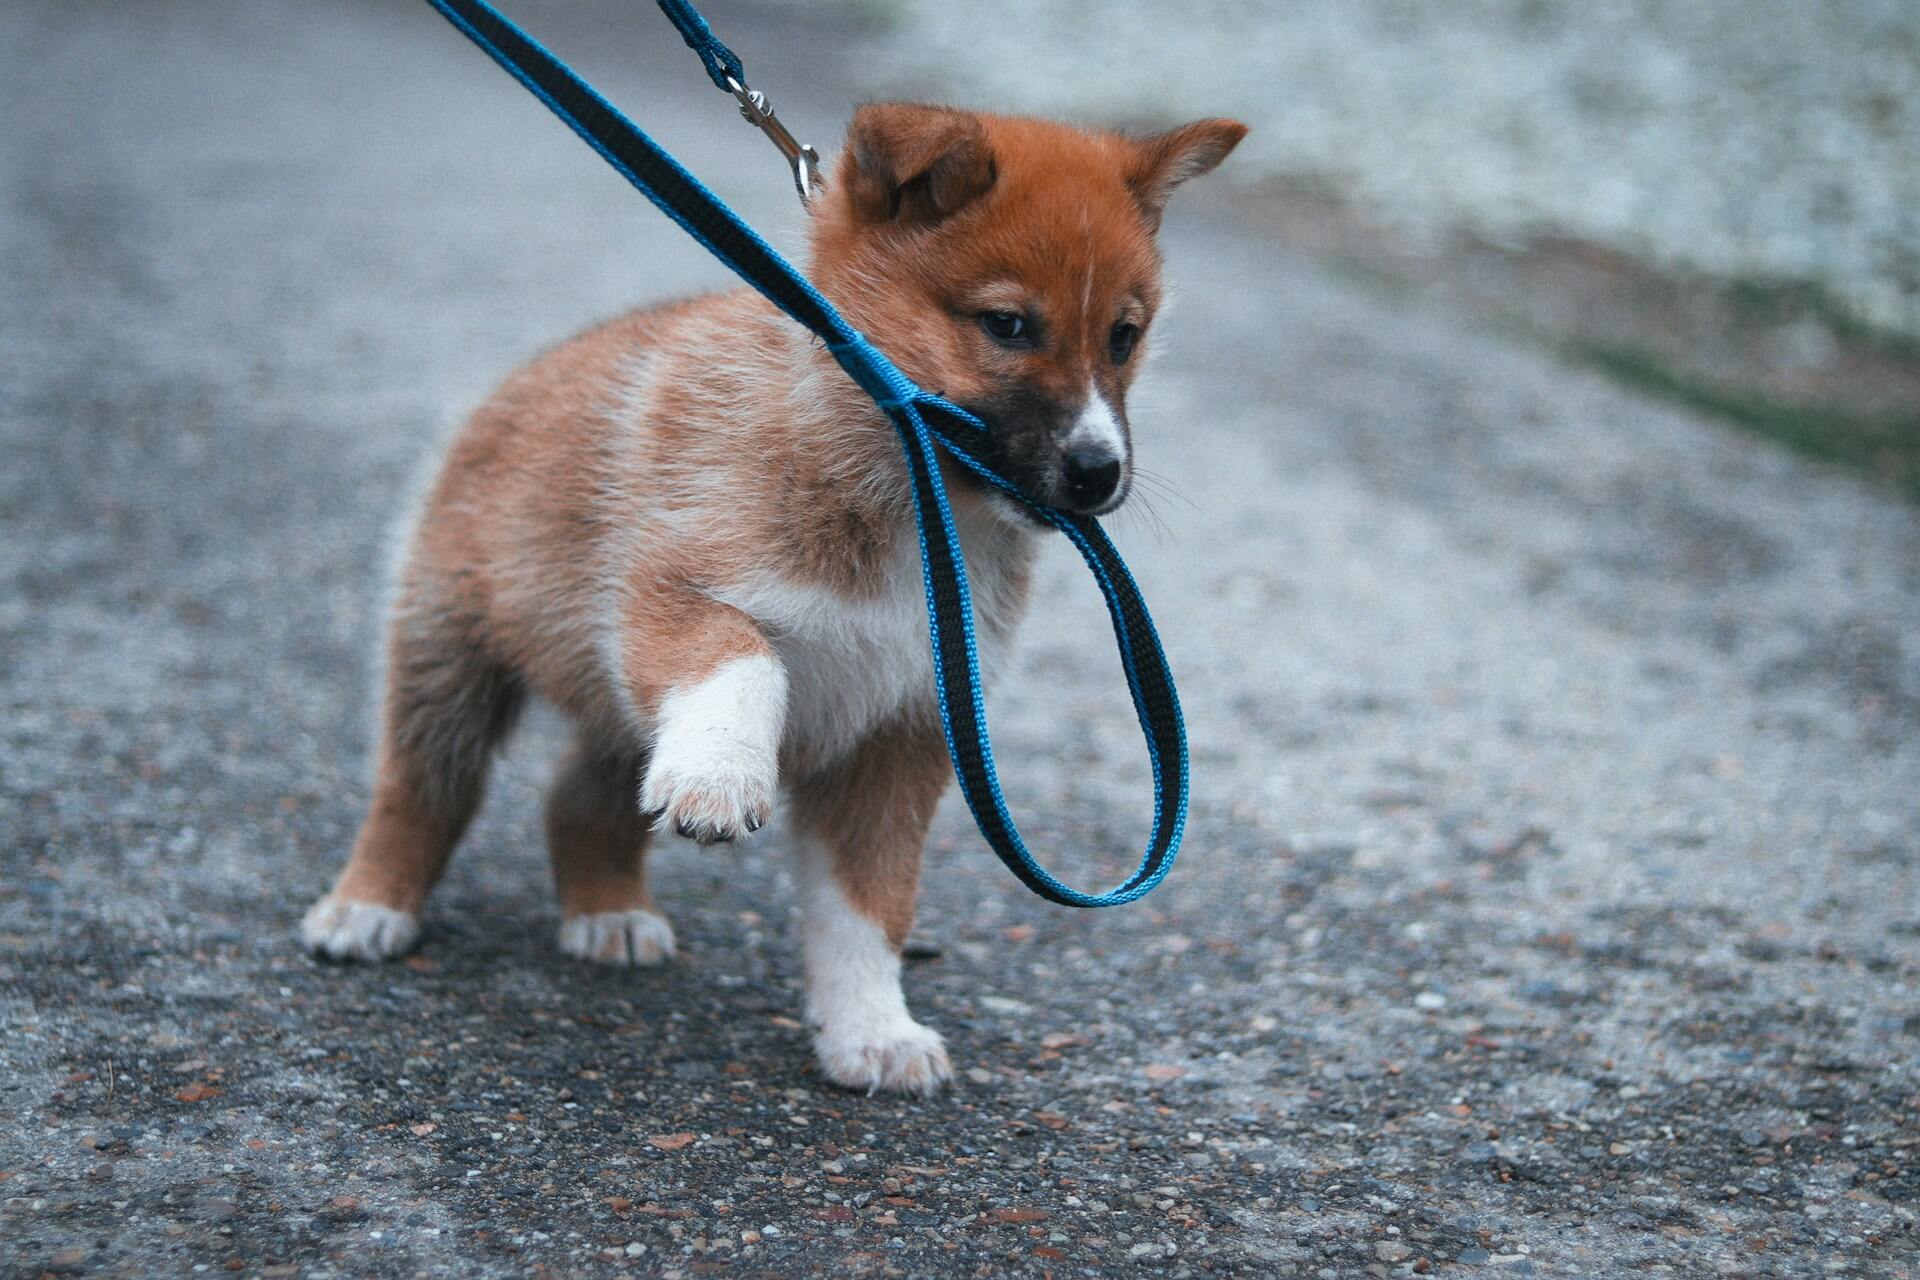 A small white and brown puppy biting against a blue leash